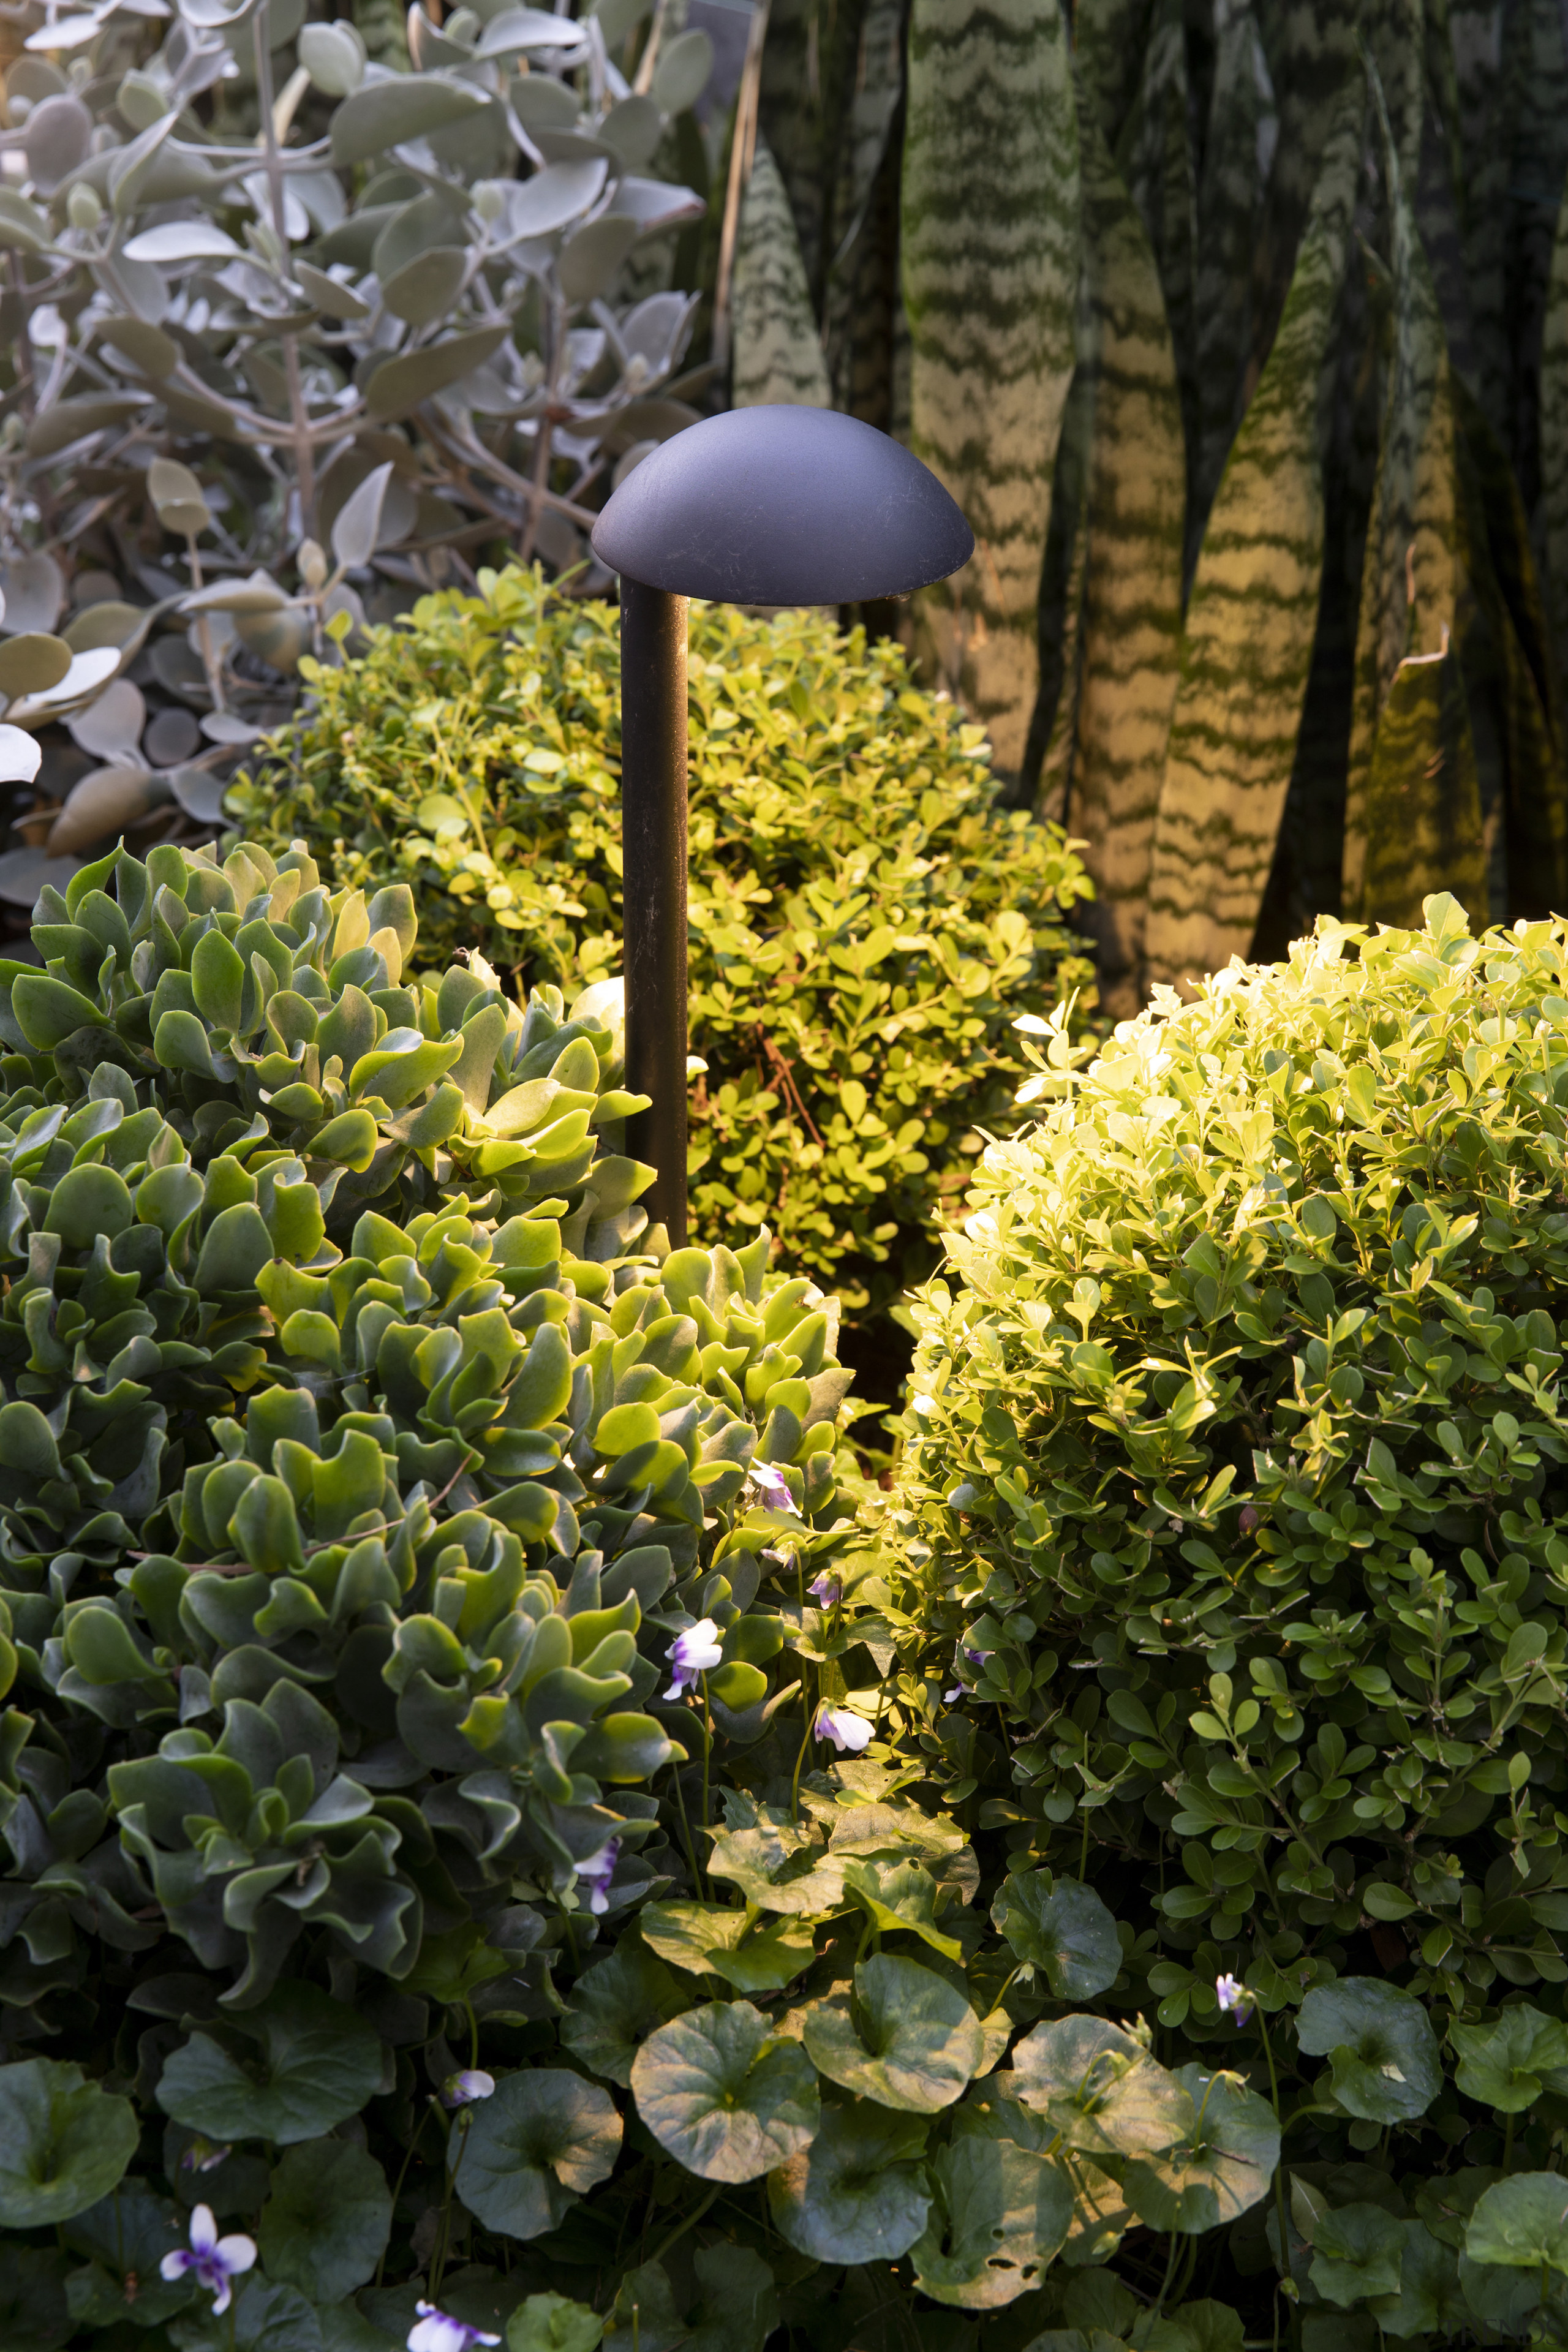 Lighting accentuates the lush plantings. - Swimmer's delight 